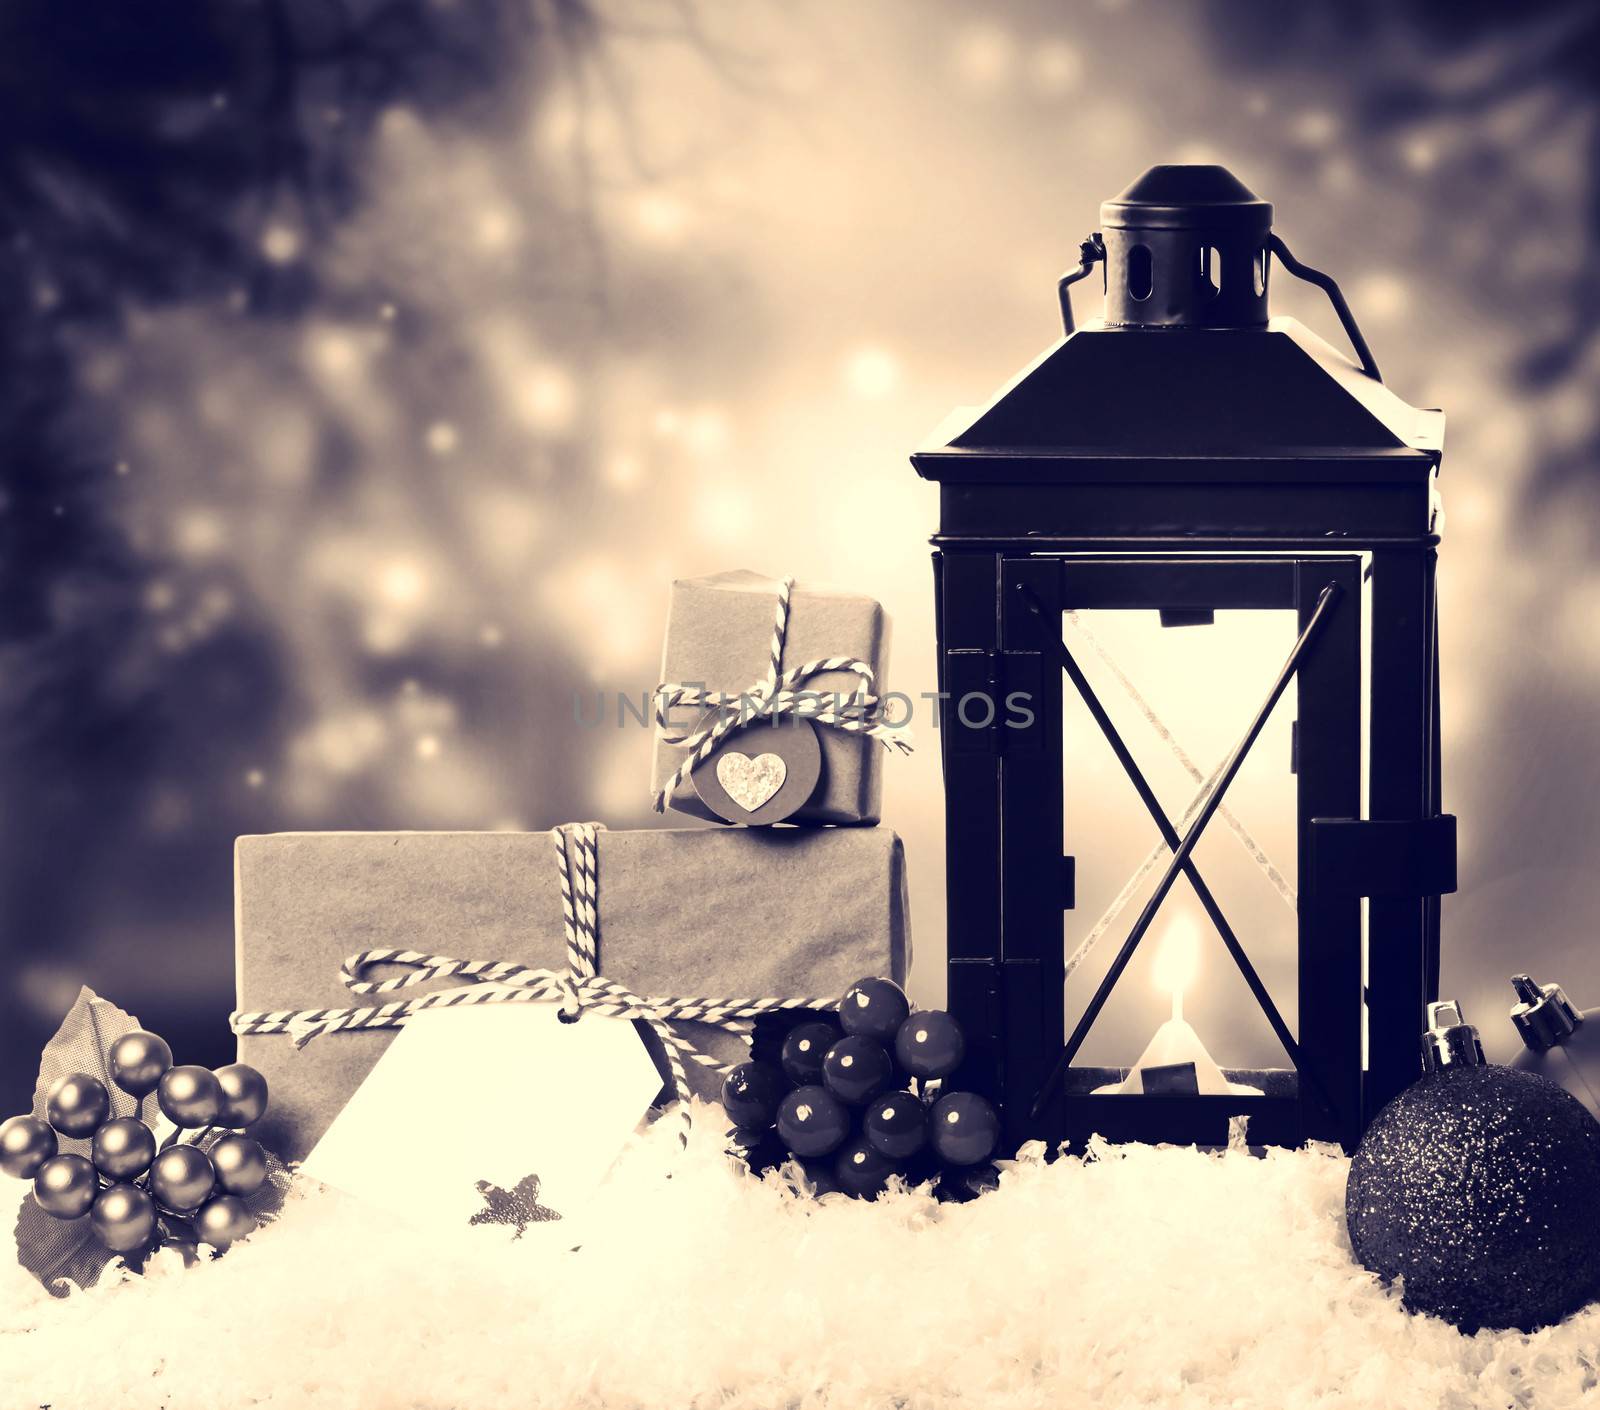 Christmas lantern with presents, ornaments and snow in sepia tone